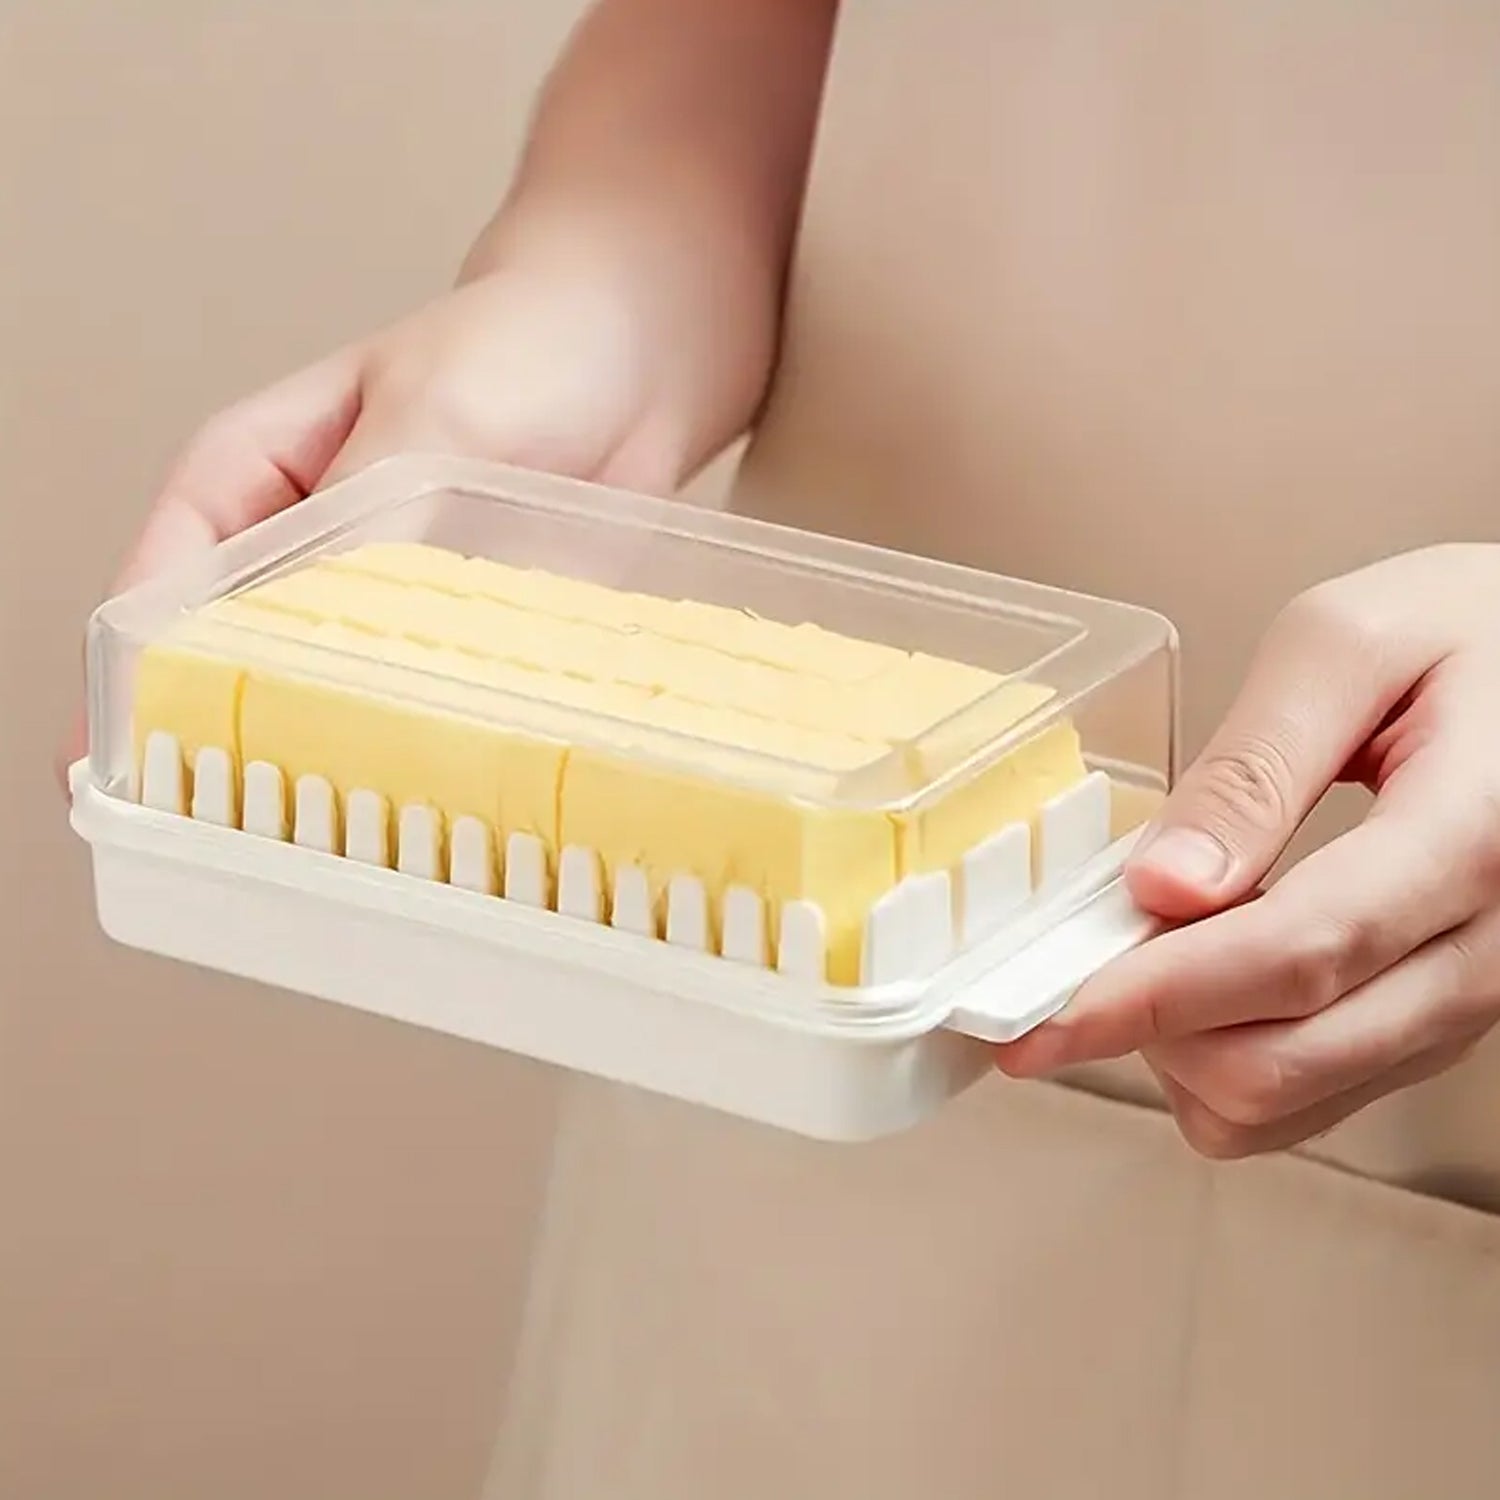 5848 Butter storage box with slicer for easy cutting,cheese butter organizer dispenser for kitchen refrigerator,Transparent plastic butter box with lid,butter cutter slicer storage tray (1 Pc)